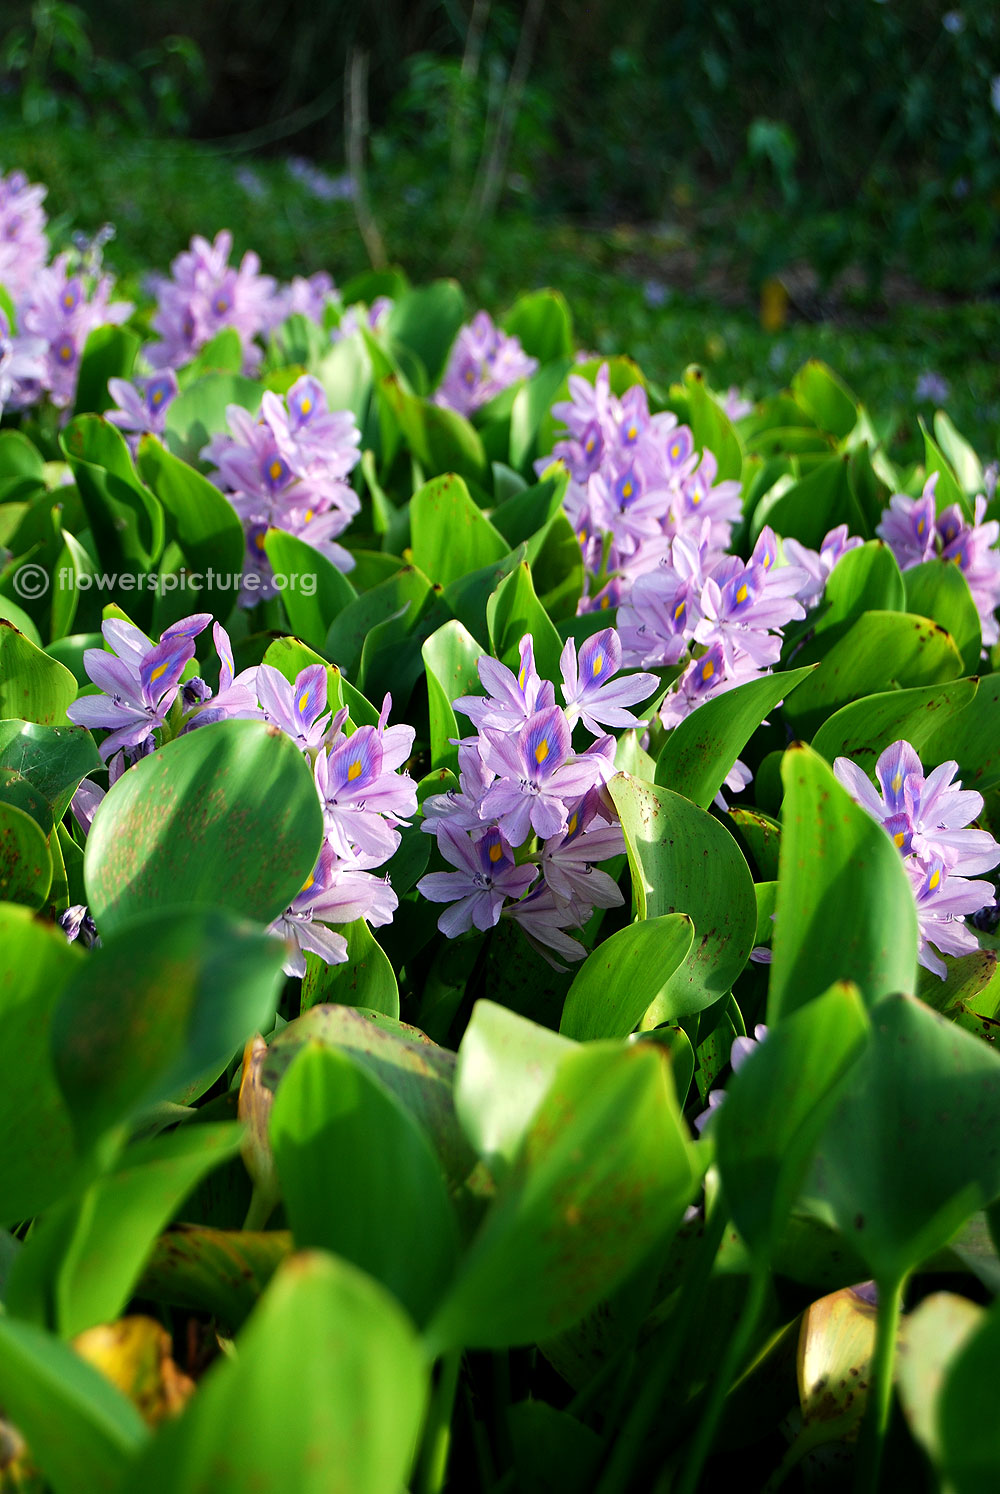 Common water hyacinth plants